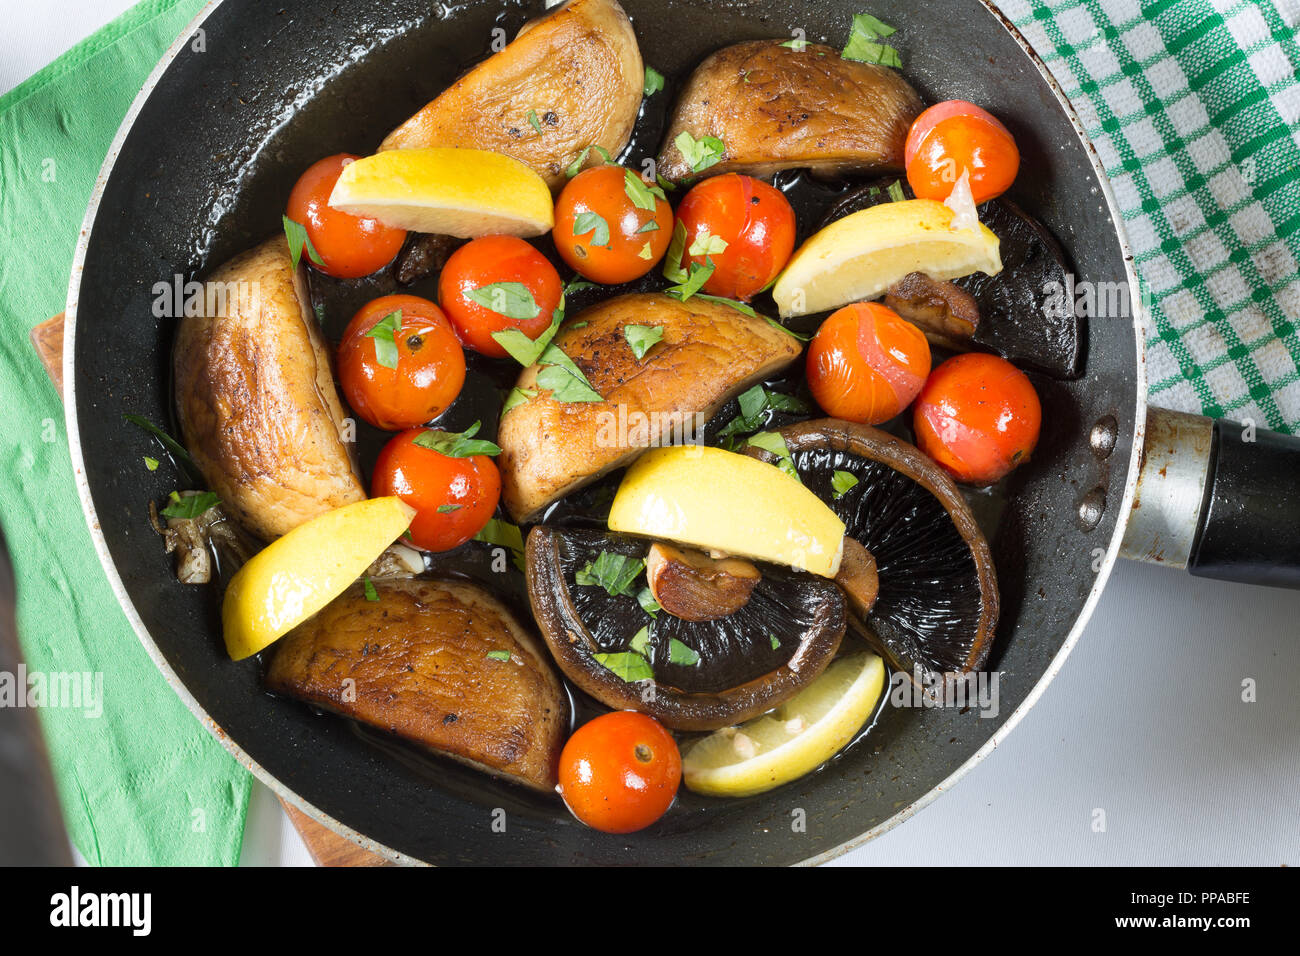 Mushrooms and Cherry Tomatoes being stir fried in a shallow frying pan, garnished with fresh chopped Parsley and Lemon wedges Stock Photo